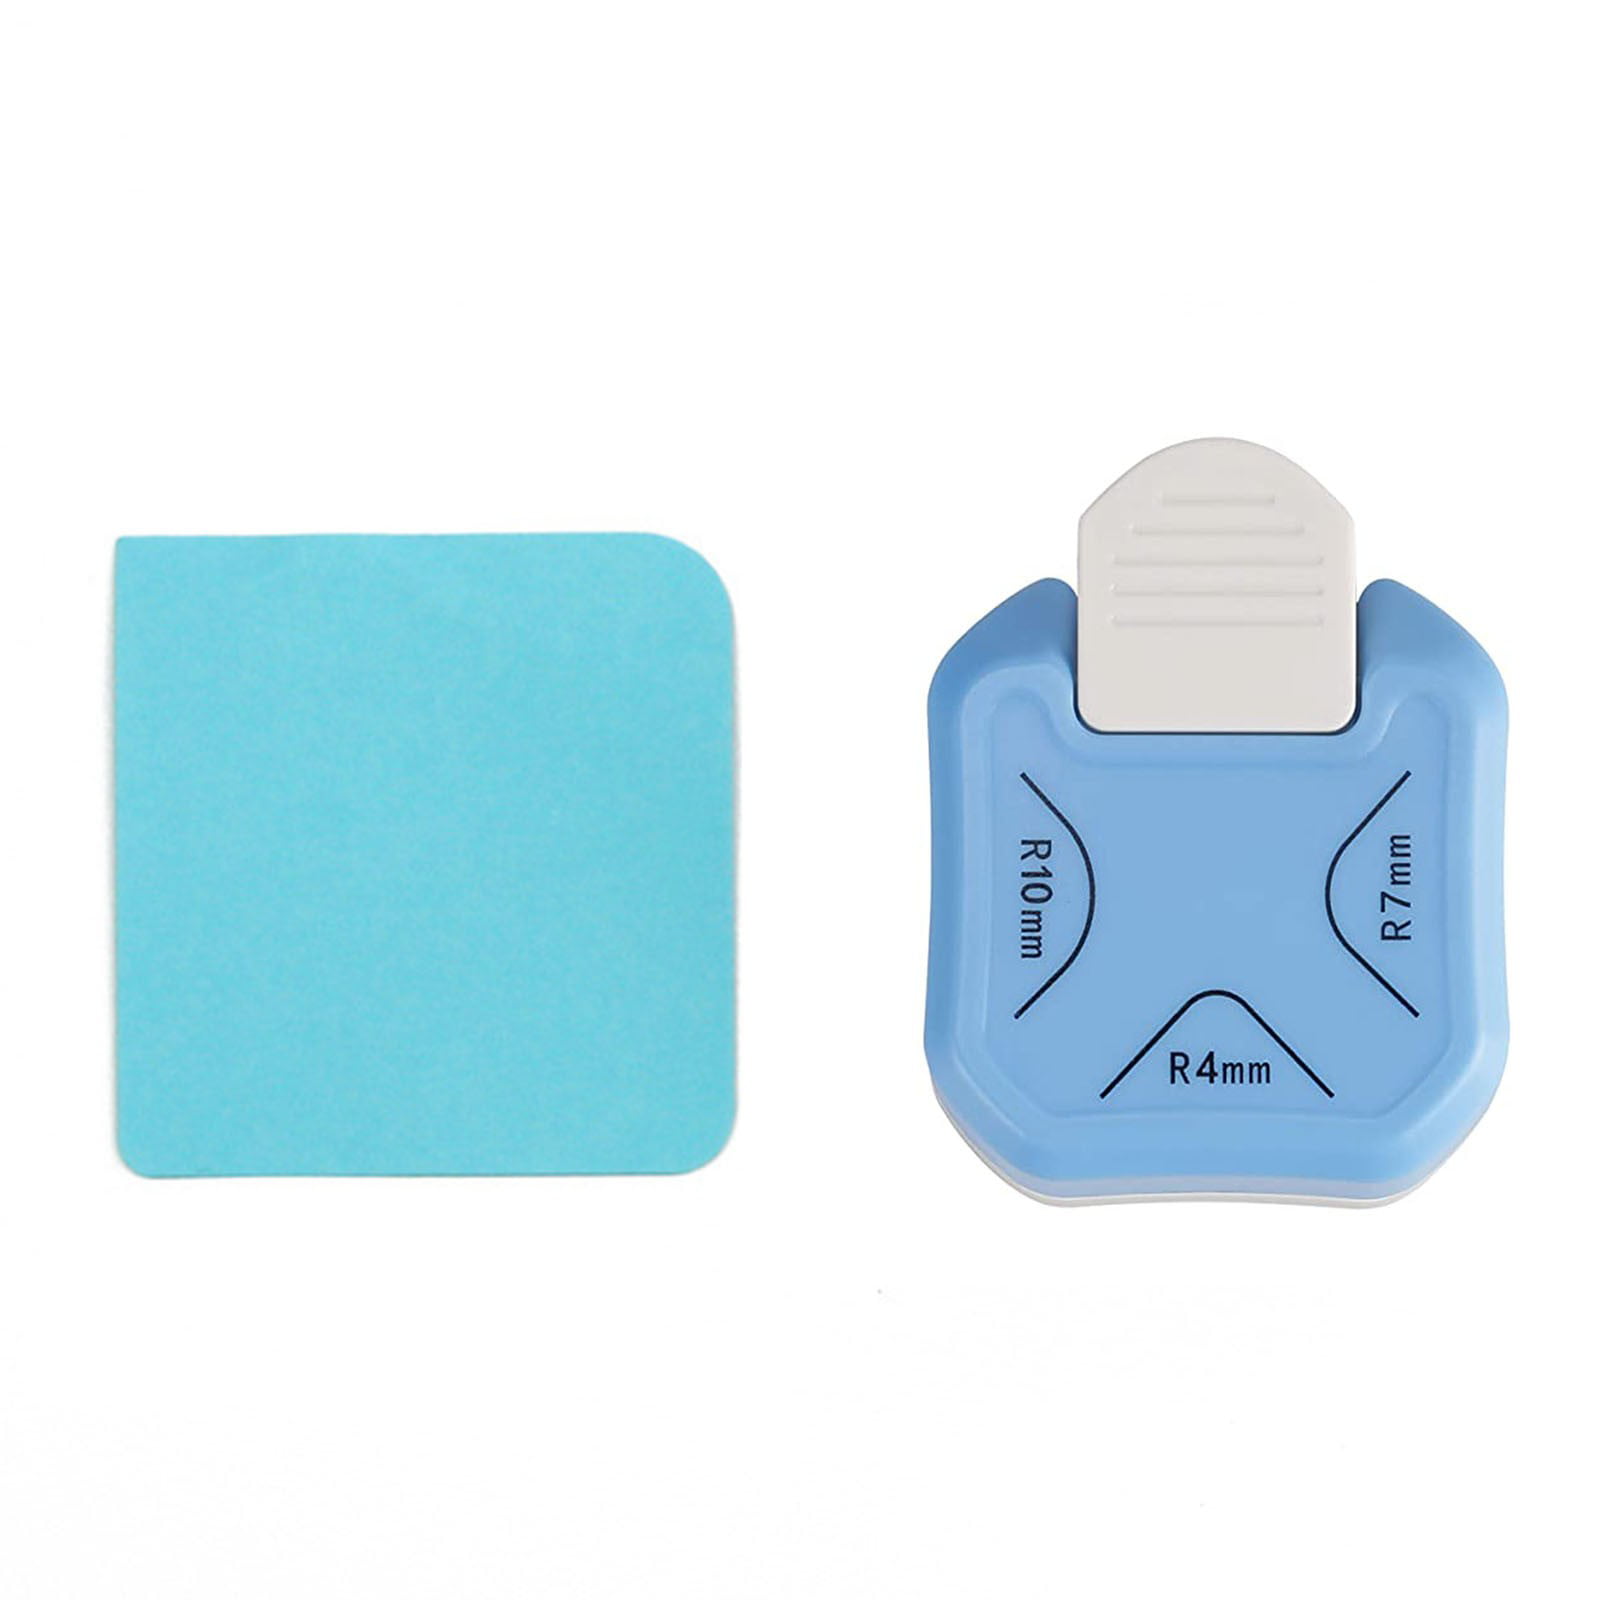 2pcs 3 Way Corner Rounder Punch Cutter DIY Projects Cardstock Hole Puncher, Size: 8.2cmx7.1cm, Other